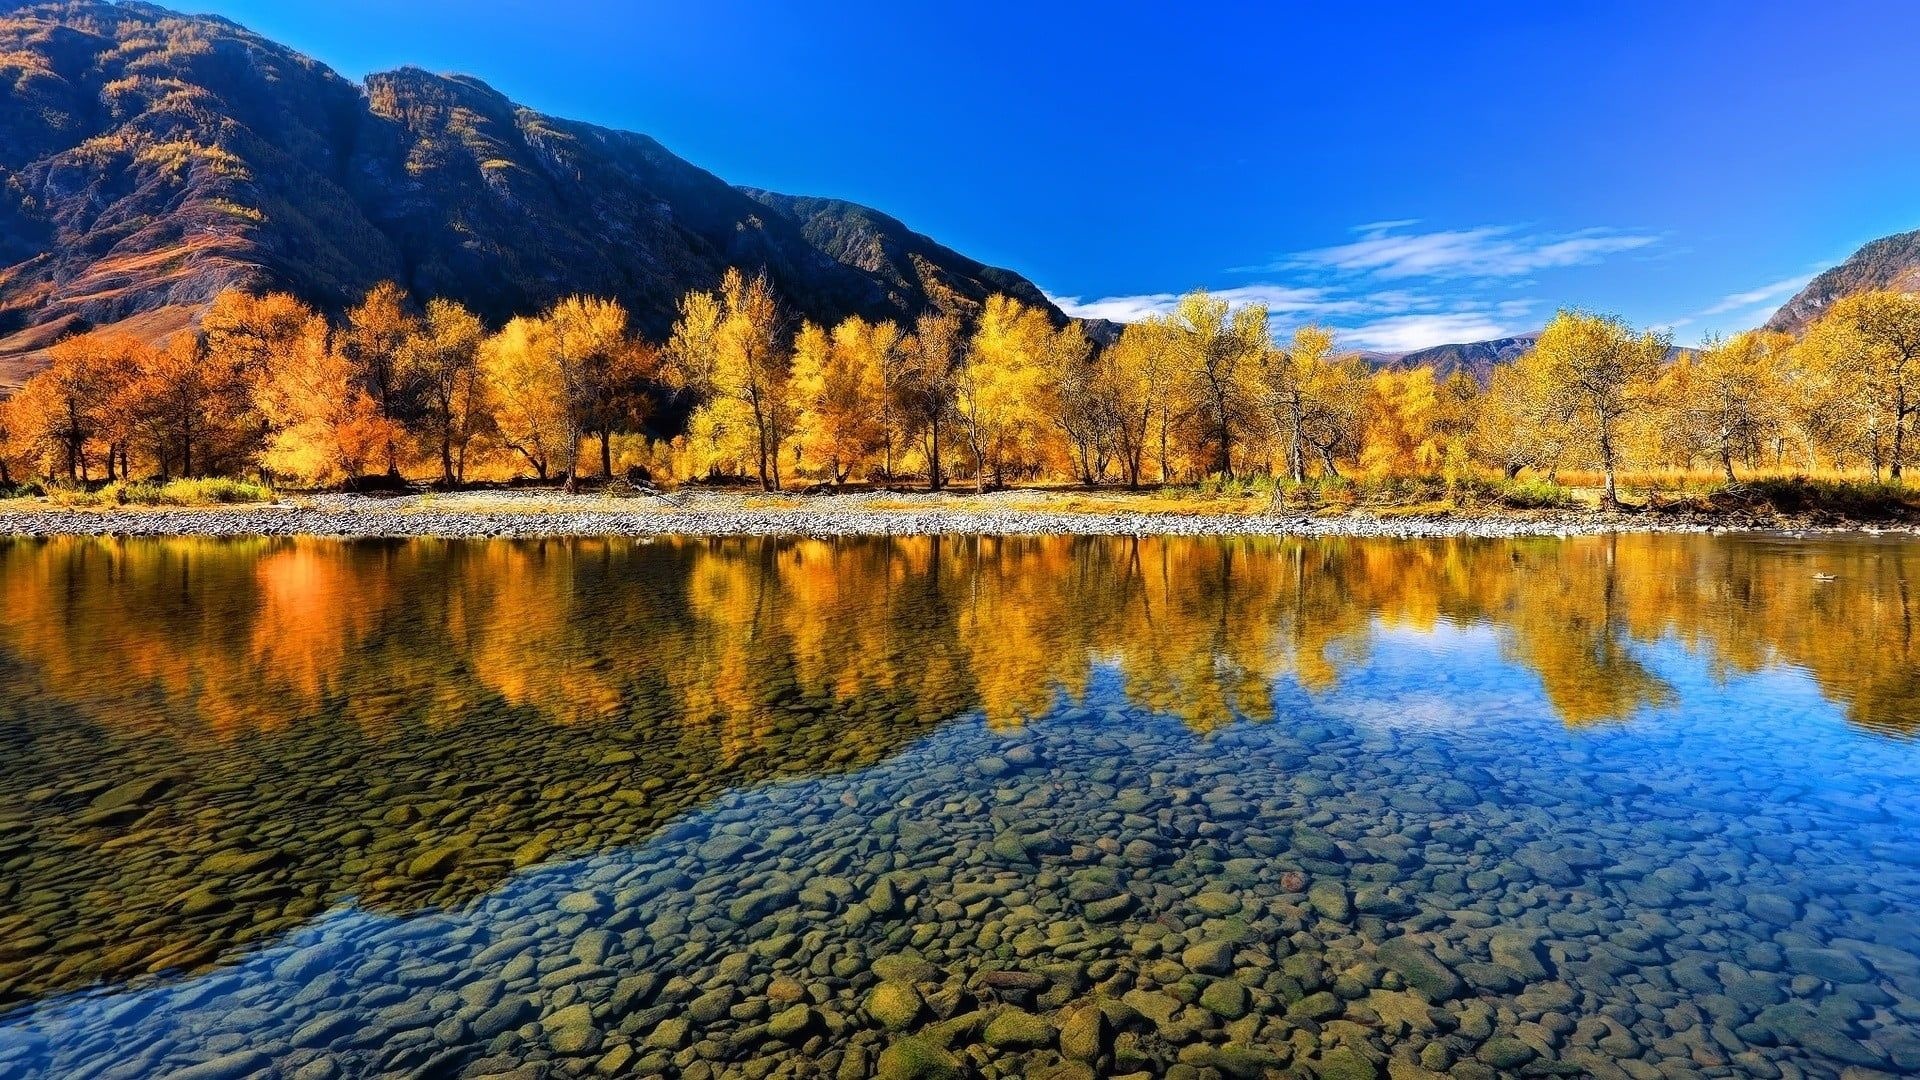 Altai Mountains, Yellow Leafed Tree, Nature Landscape, Reflection, 1920x1080 Full HD Desktop